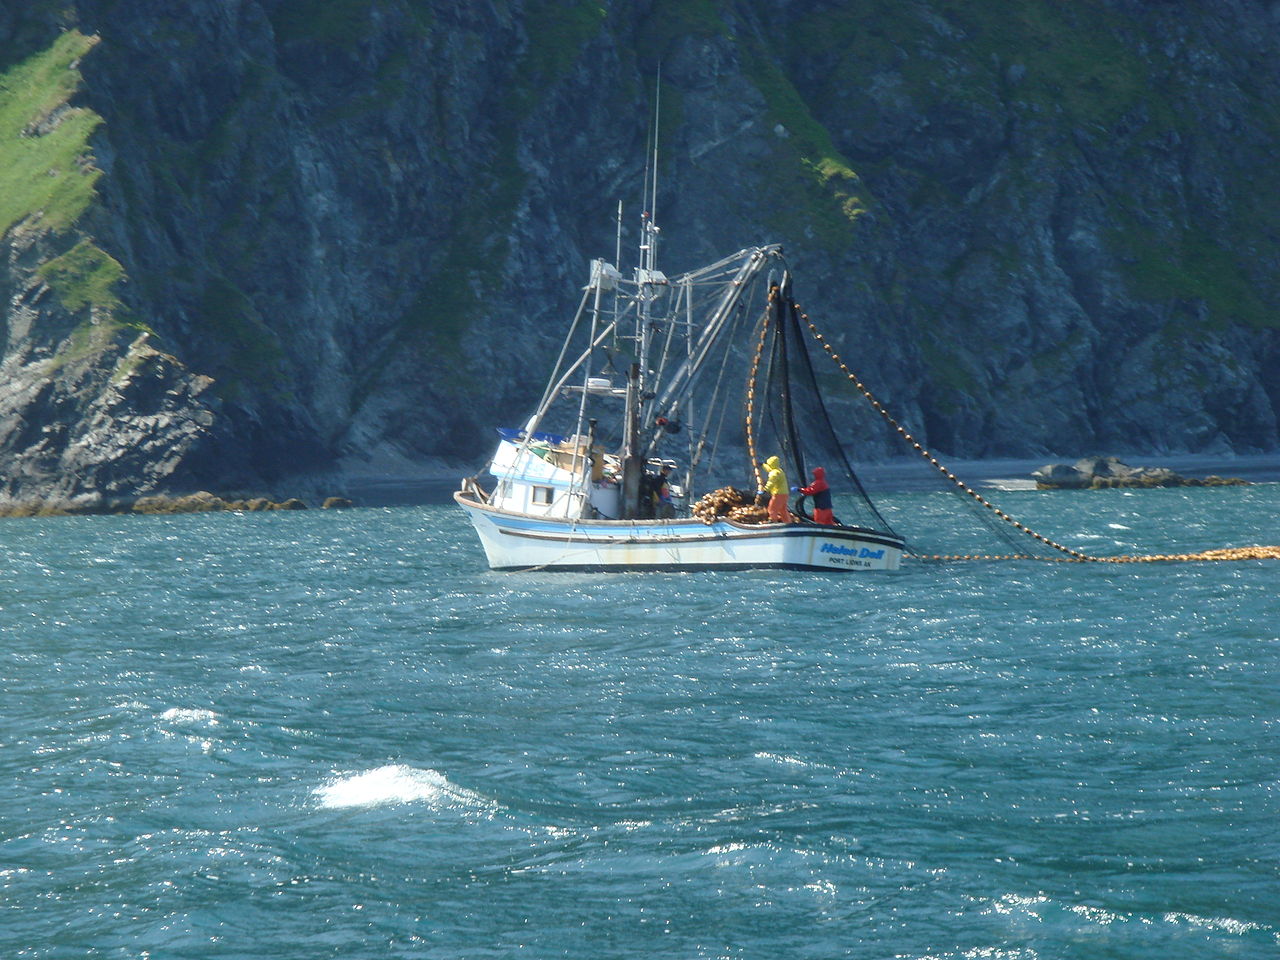 A seiner fishing for salmon off the coast of Raspberry Island in July 2009. (Public domain photo courtesy of NancyHeise)